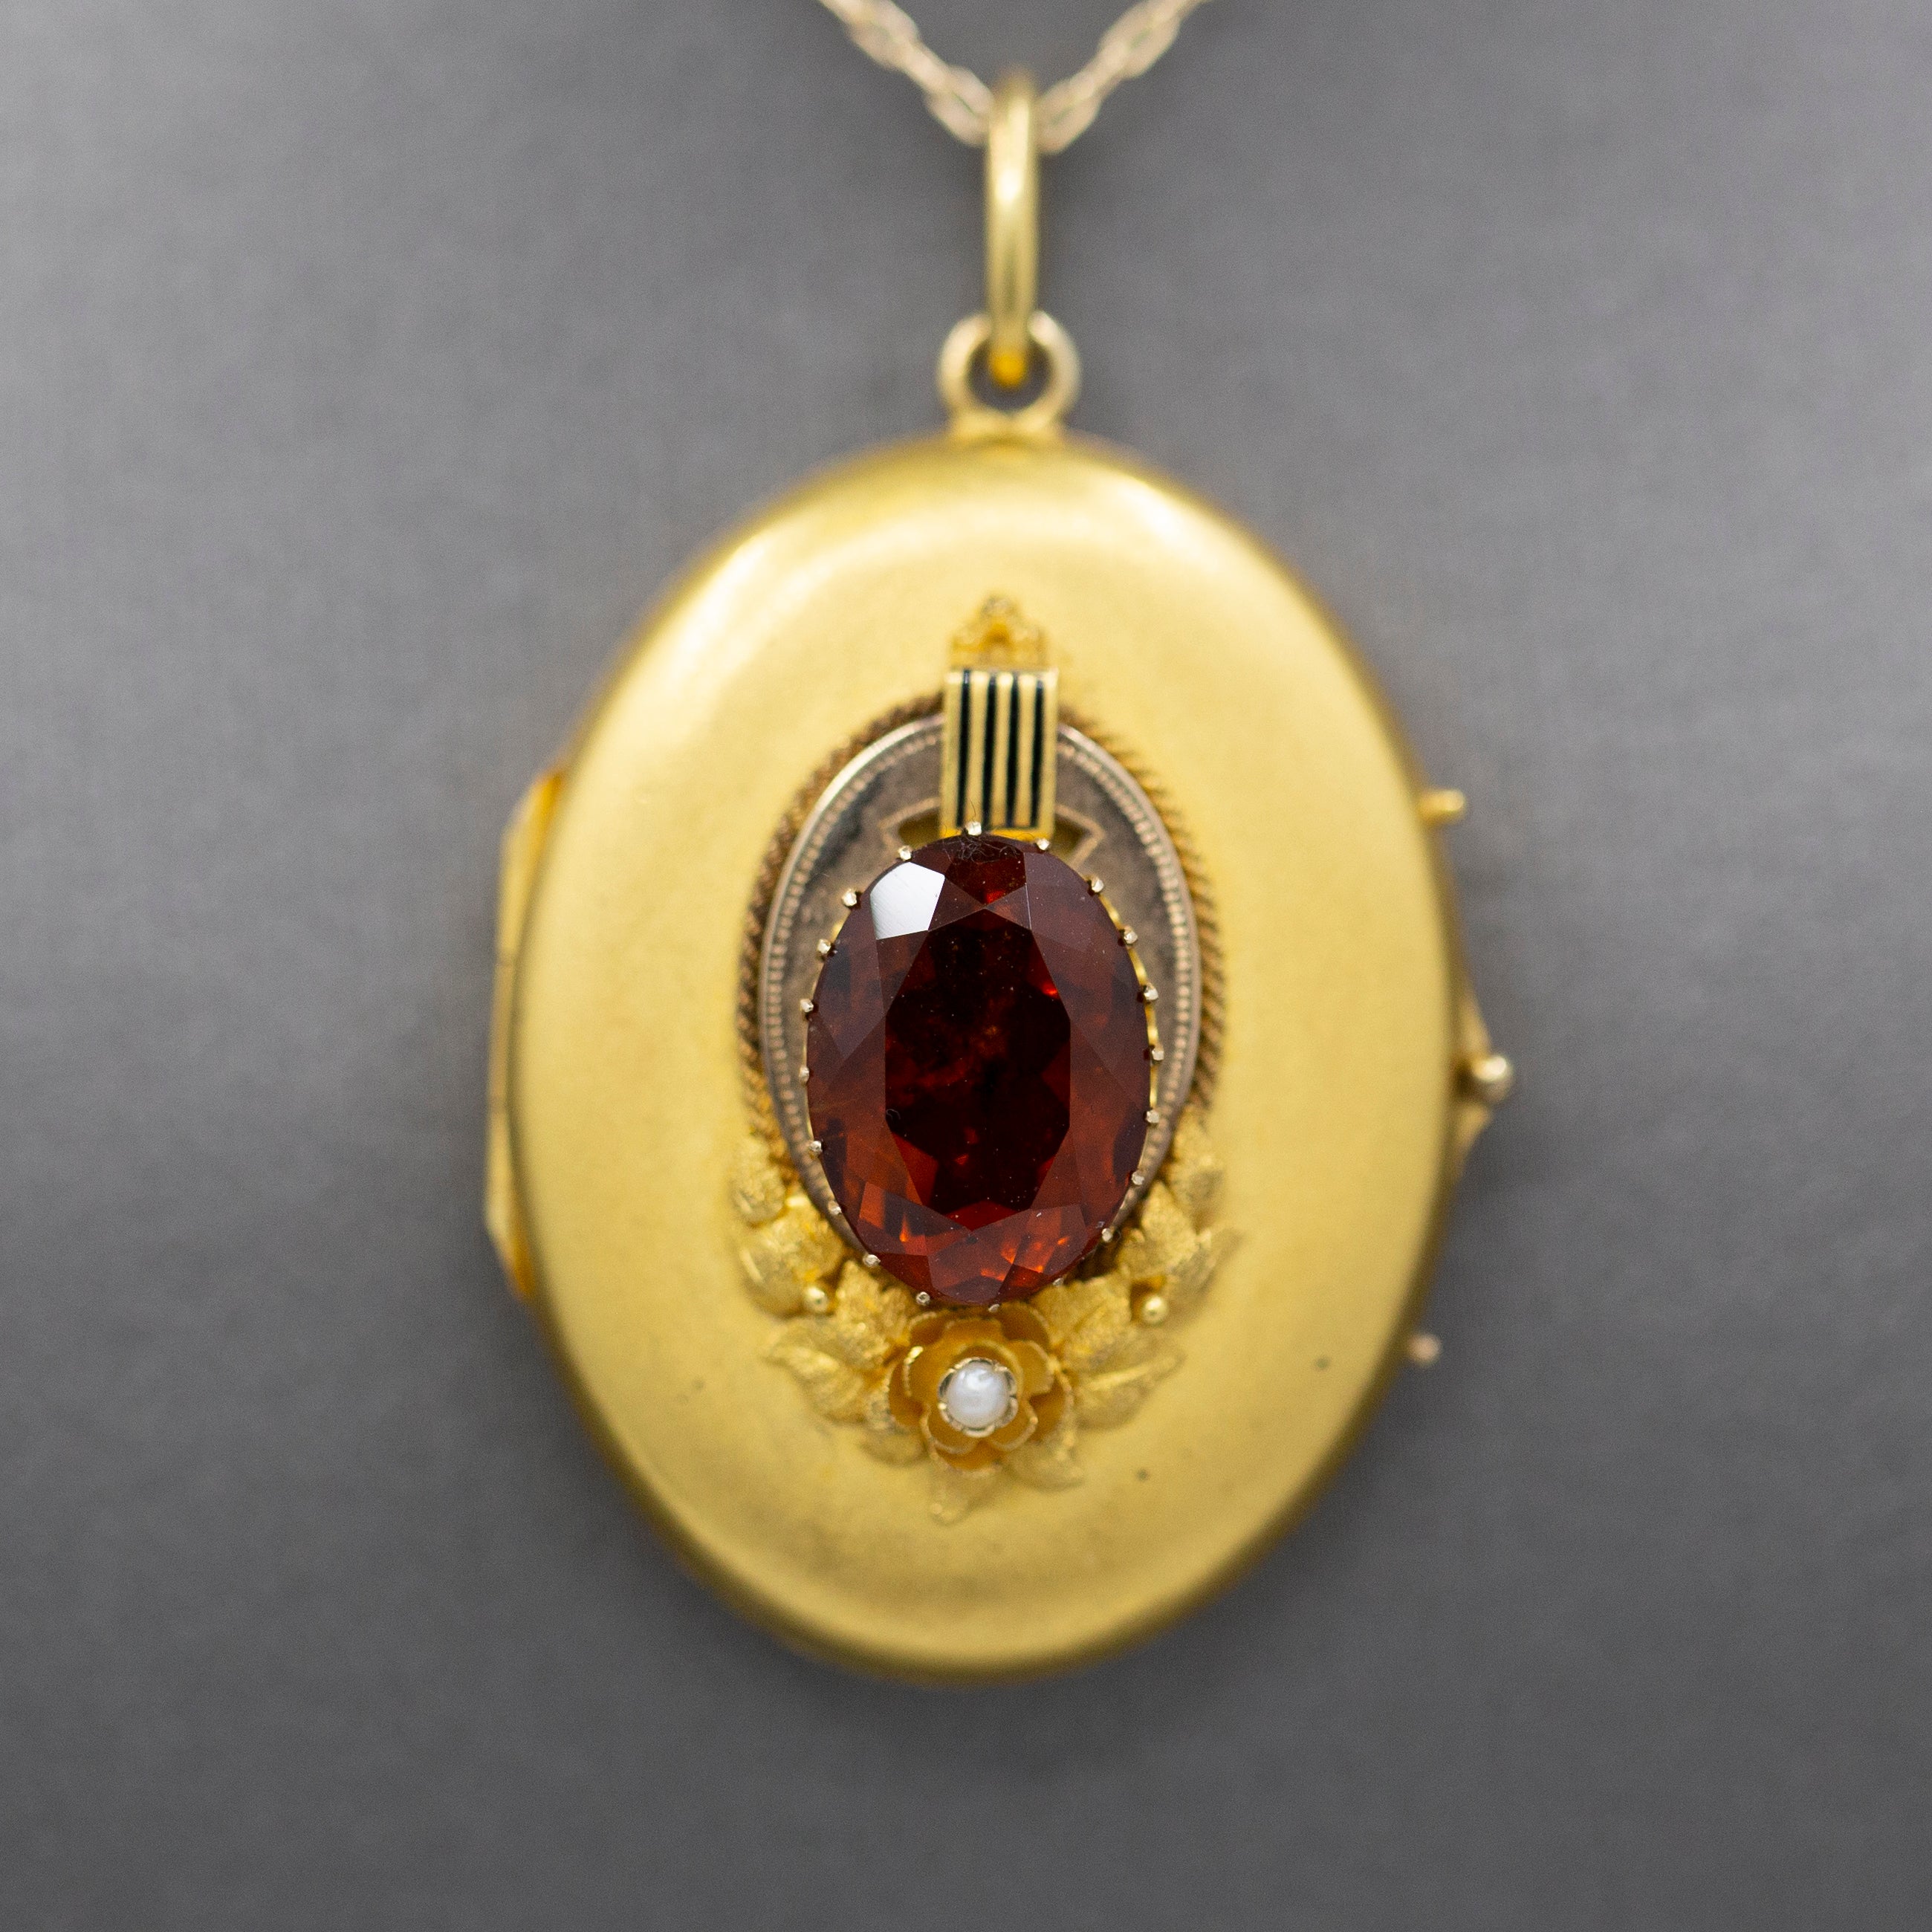 Exquisite Art Nouveau Madeira Citrine and Seed Pearl Large Locket in 14k Yellow Gold